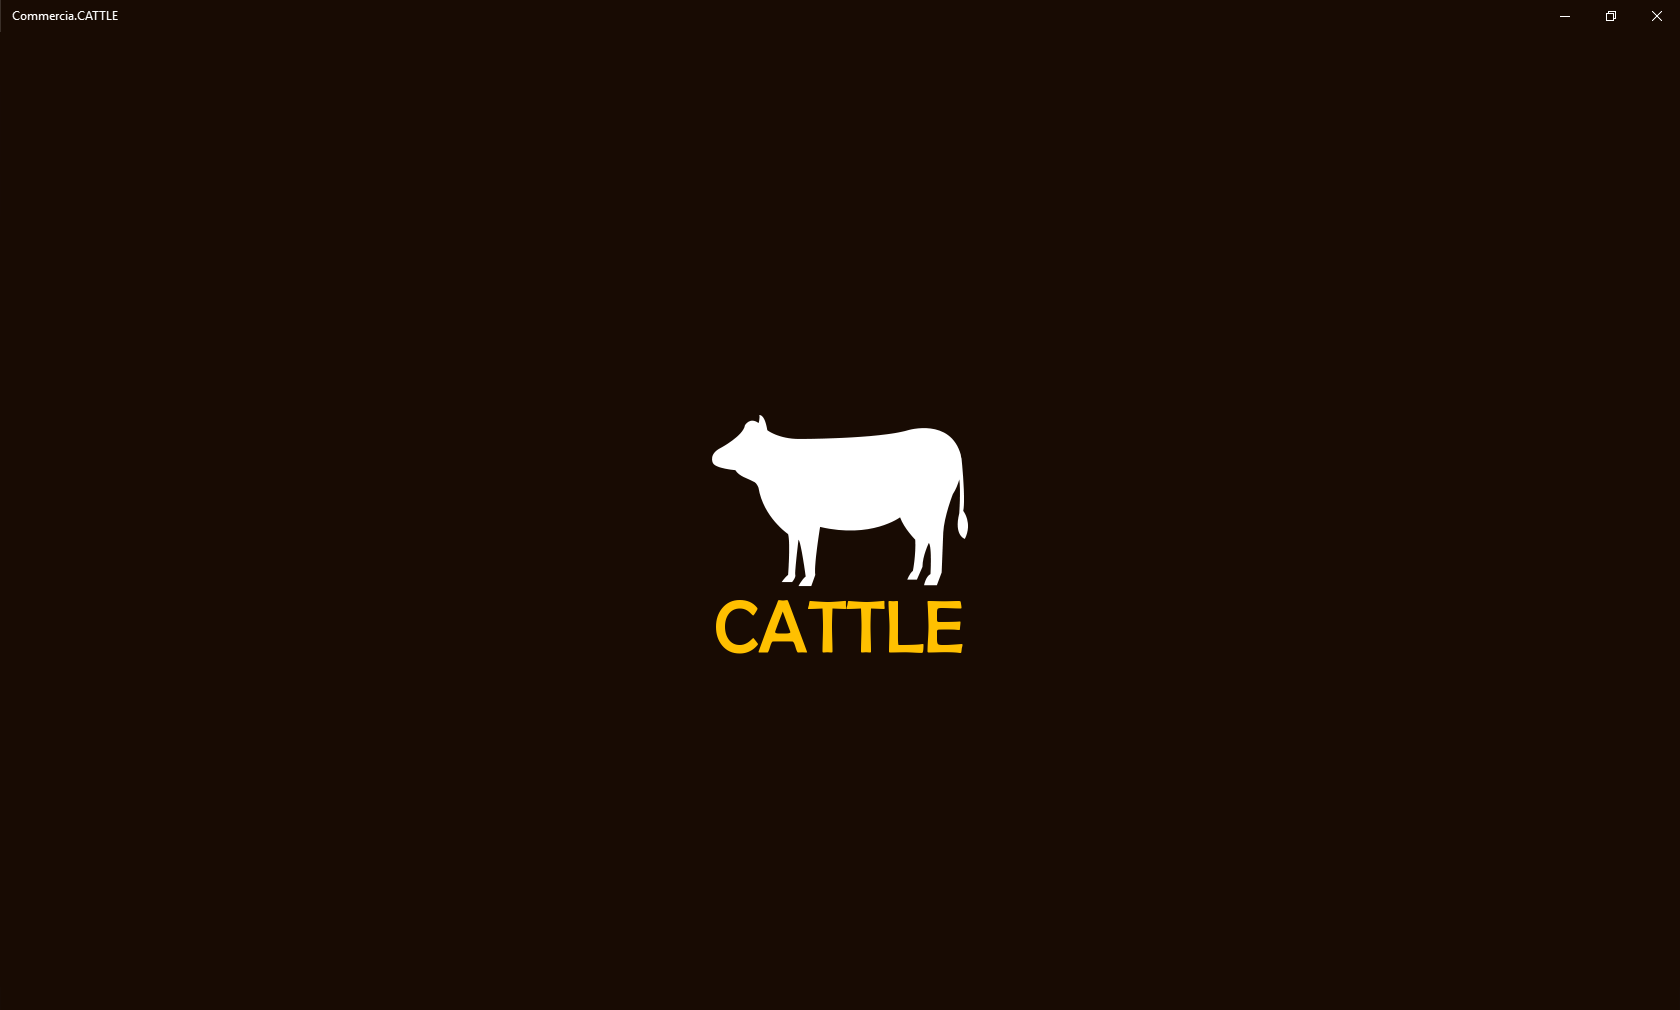 Commercia.CATTLE